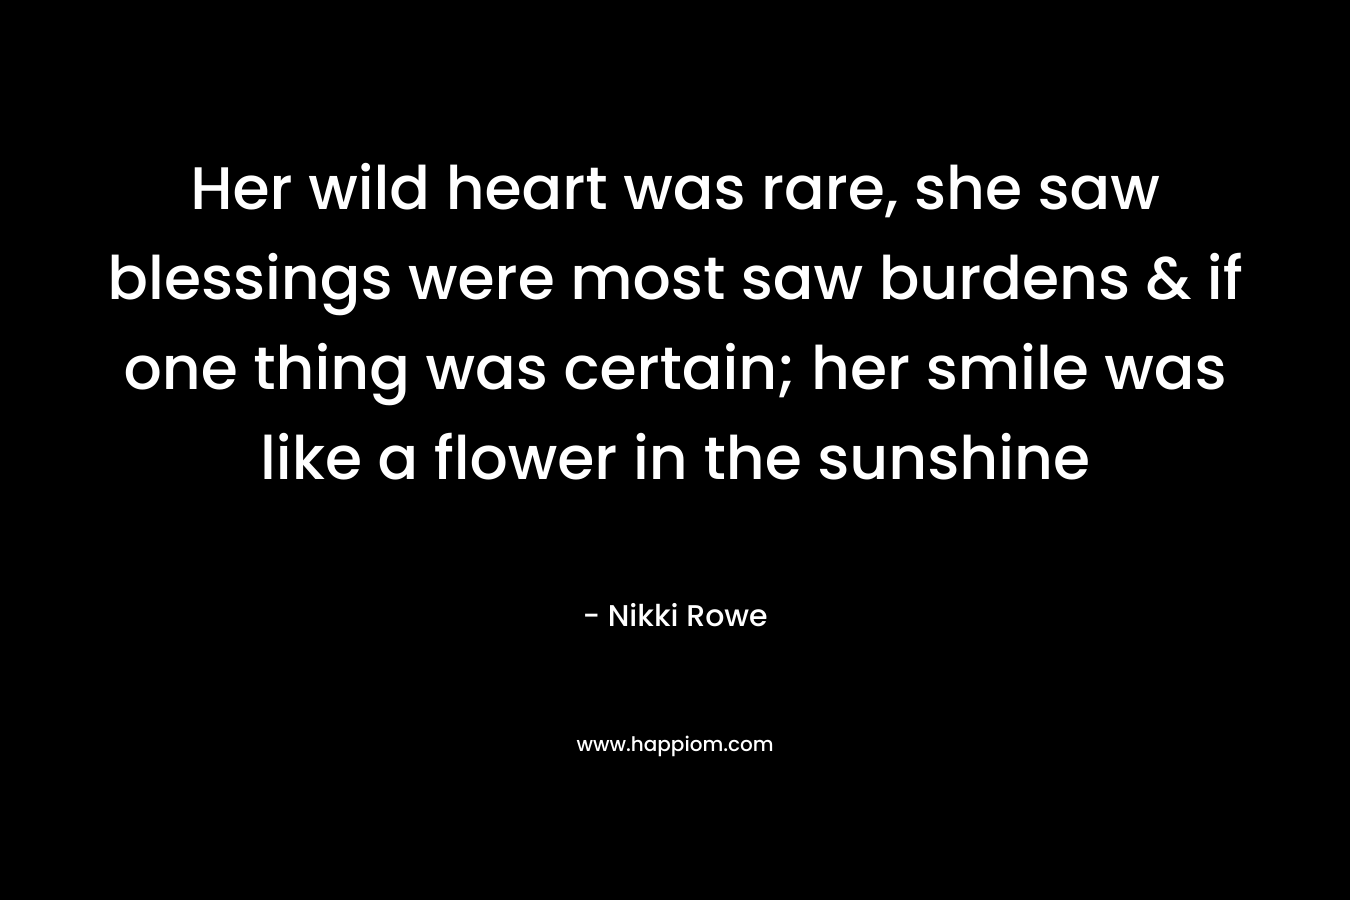 Her wild heart was rare, she saw blessings were most saw burdens & if one thing was certain; her smile was like a flower in the sunshine – Nikki Rowe